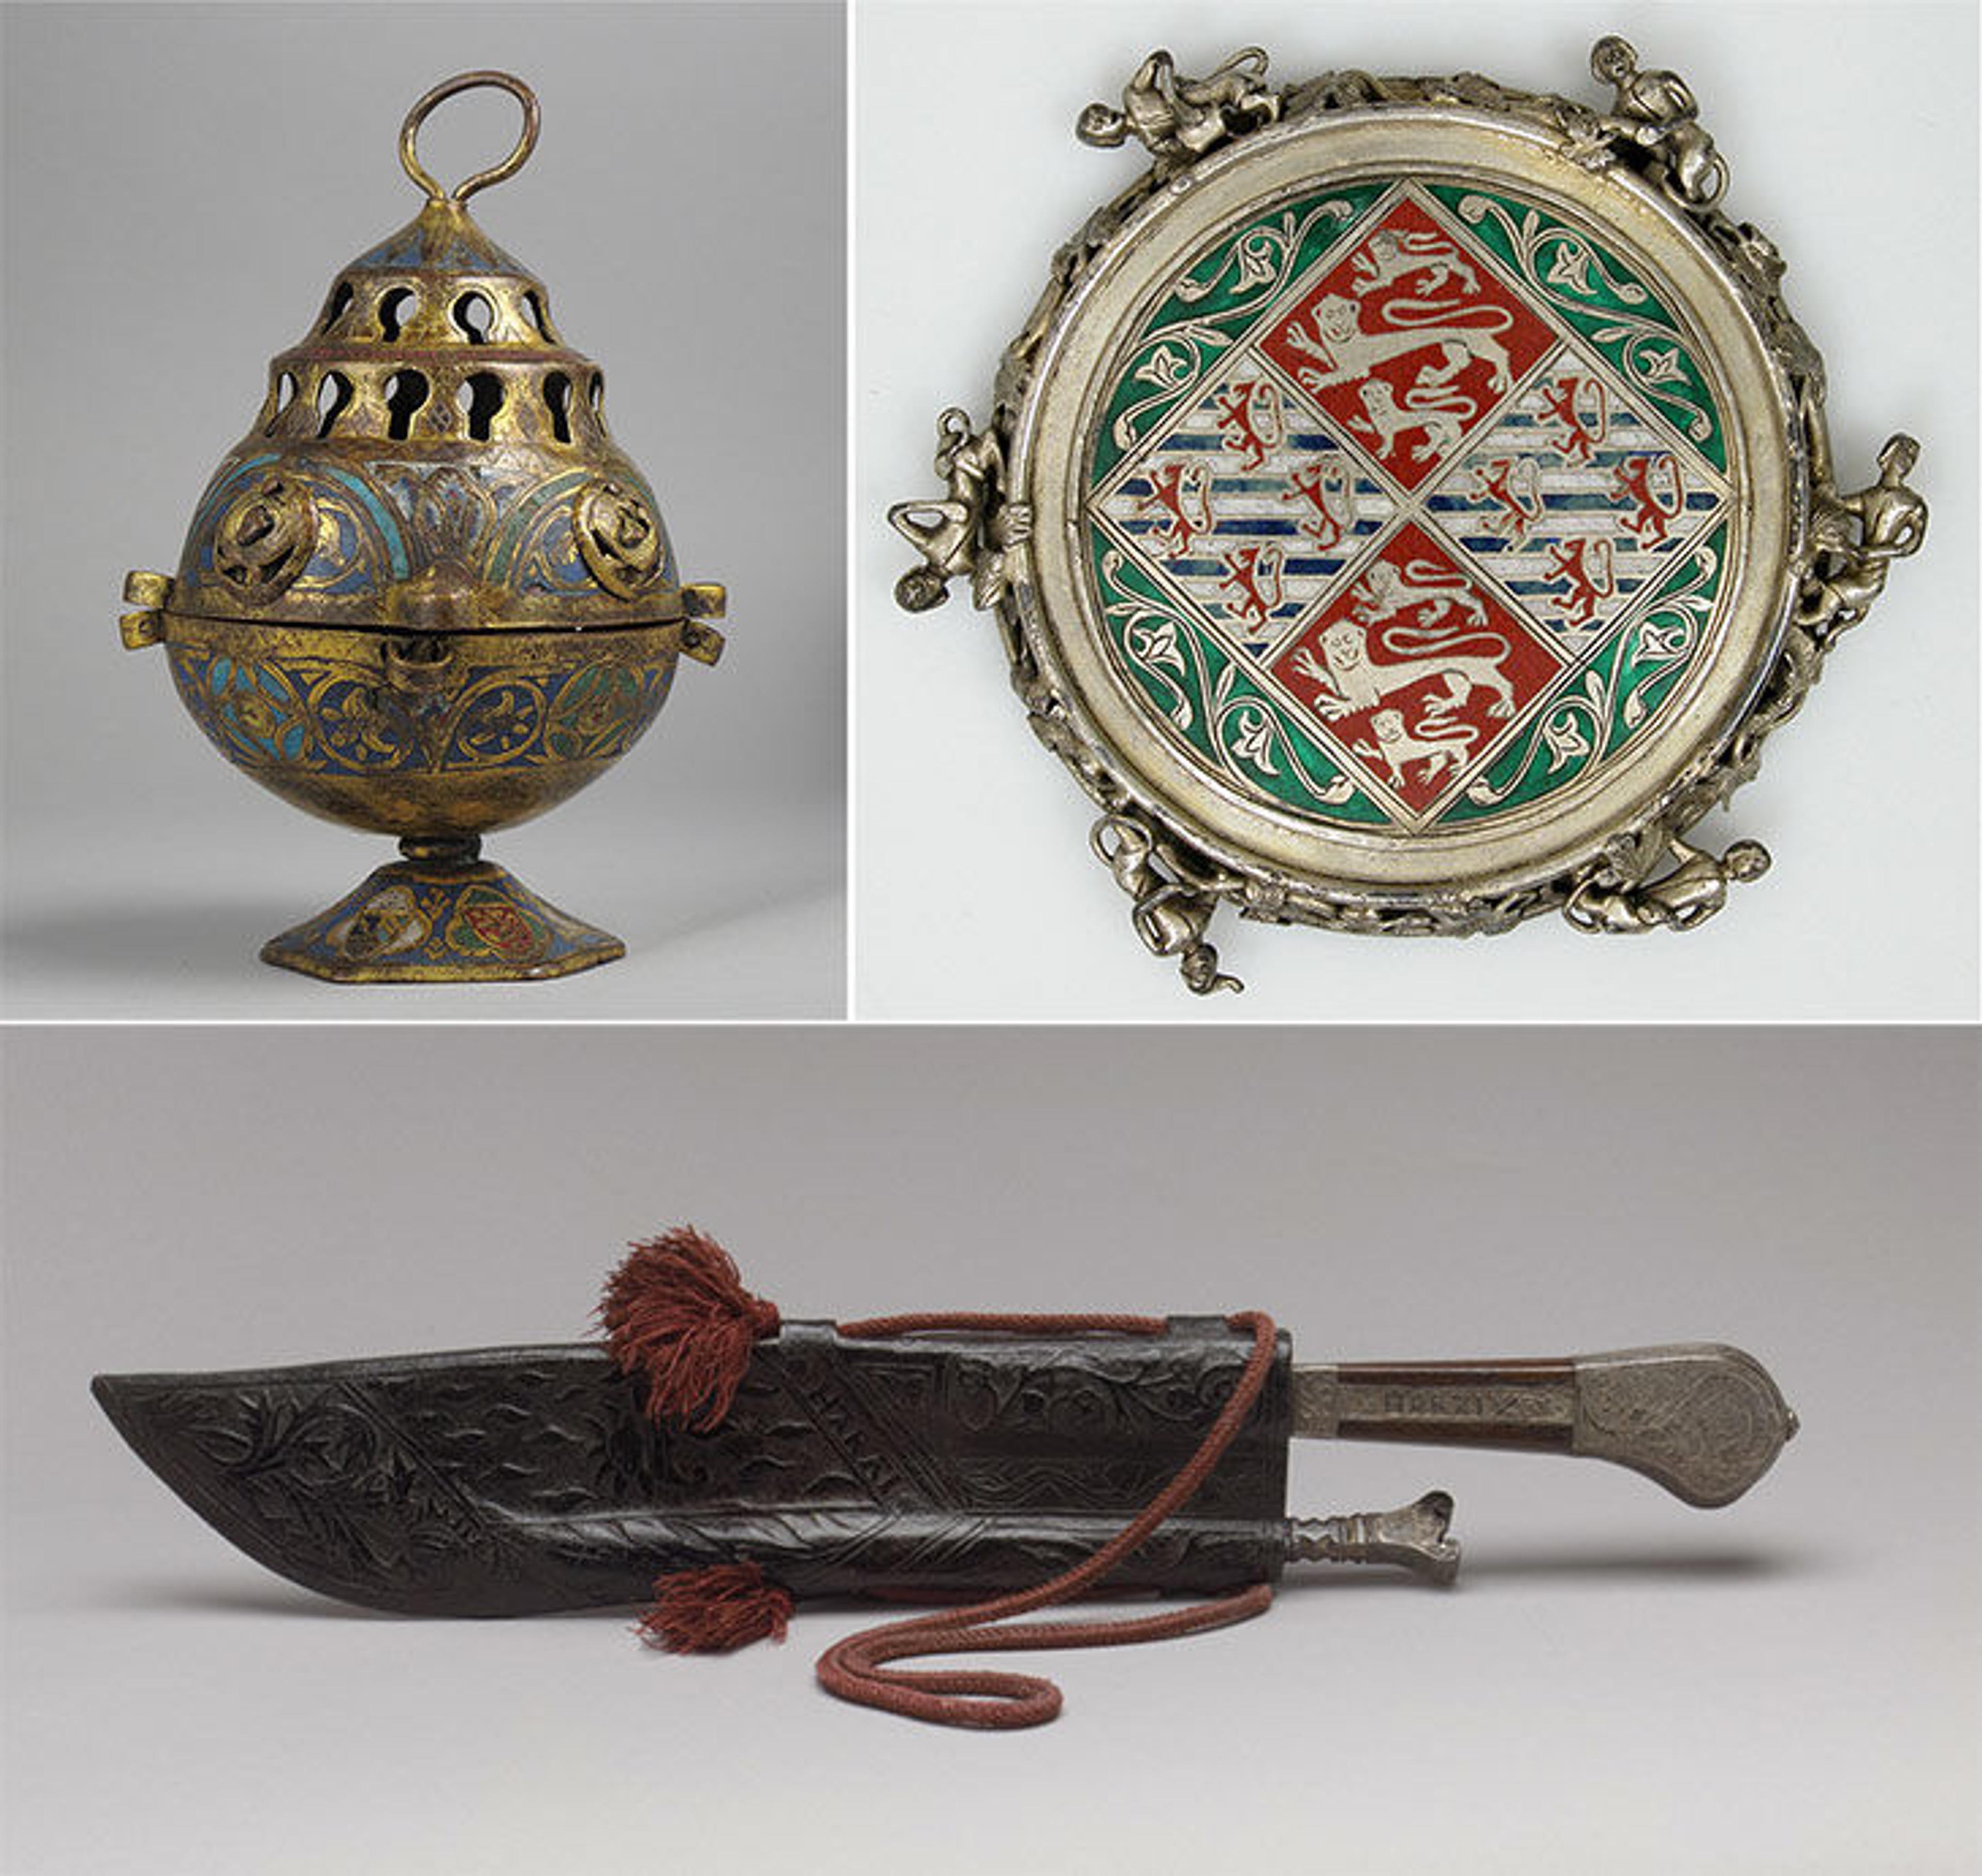 Three medieval objects